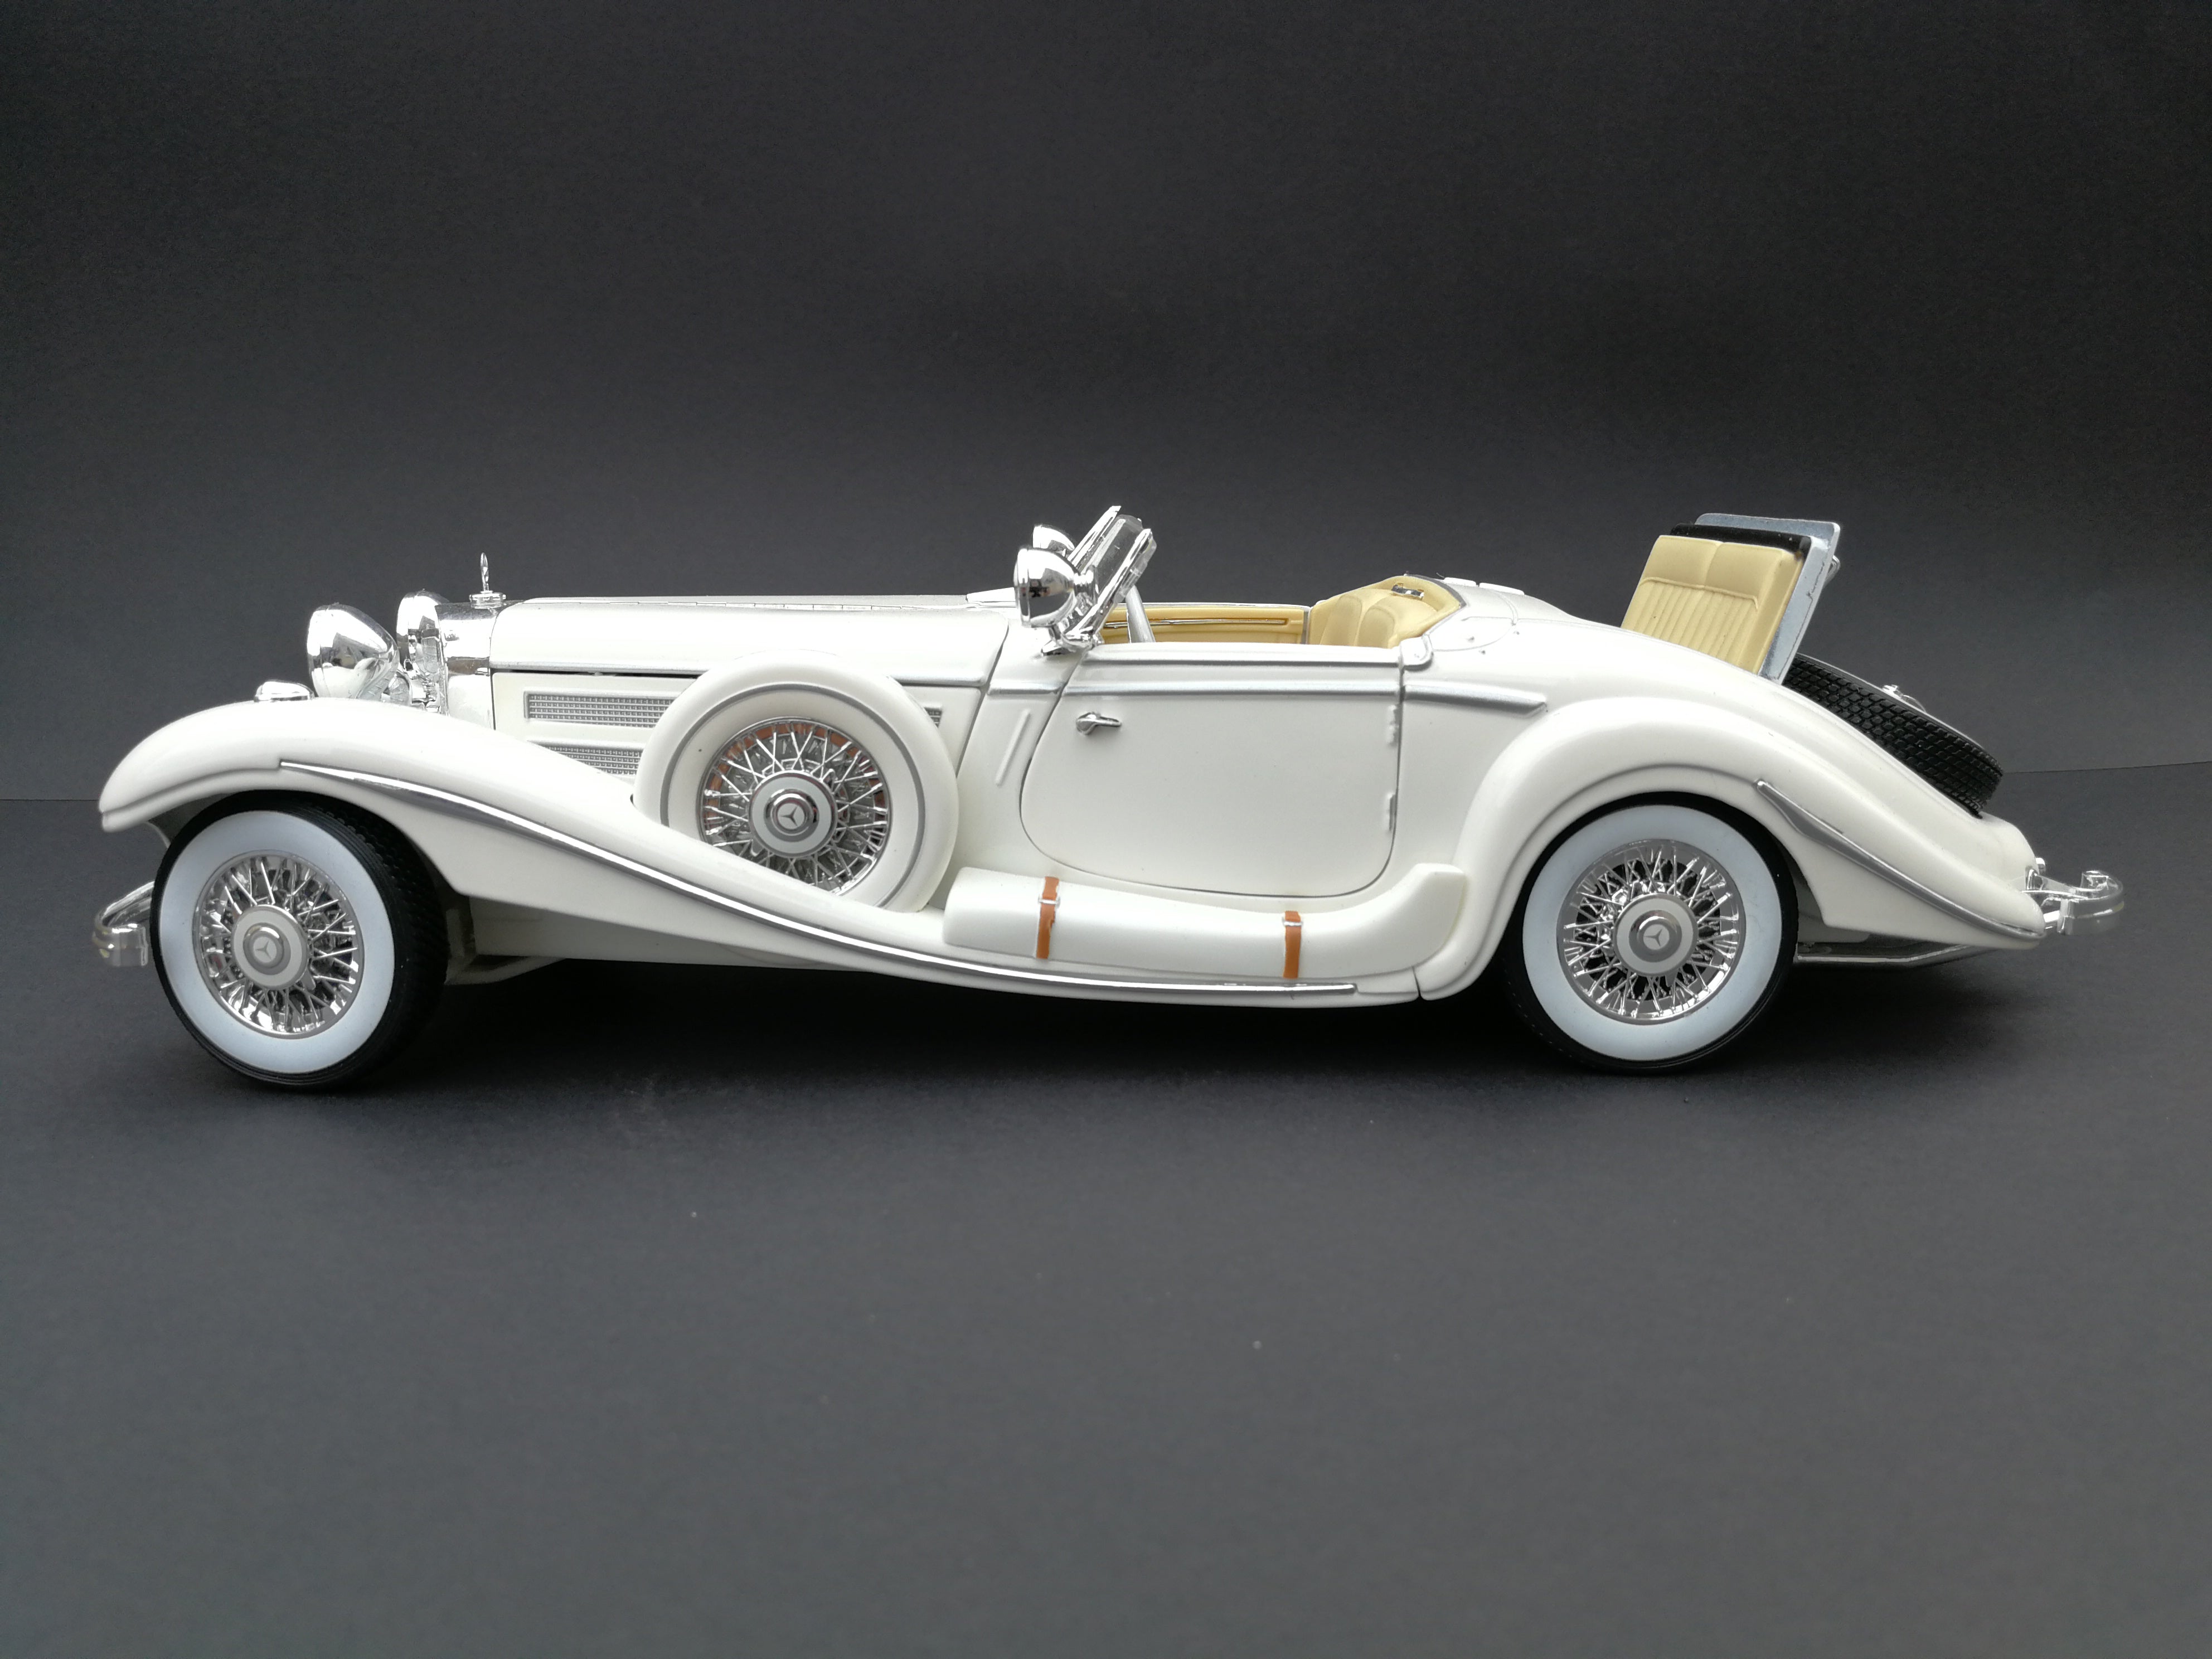 1936 Mercedez Benz 500K special roadster Diercast car. Scale: 1/18. White. Side view.